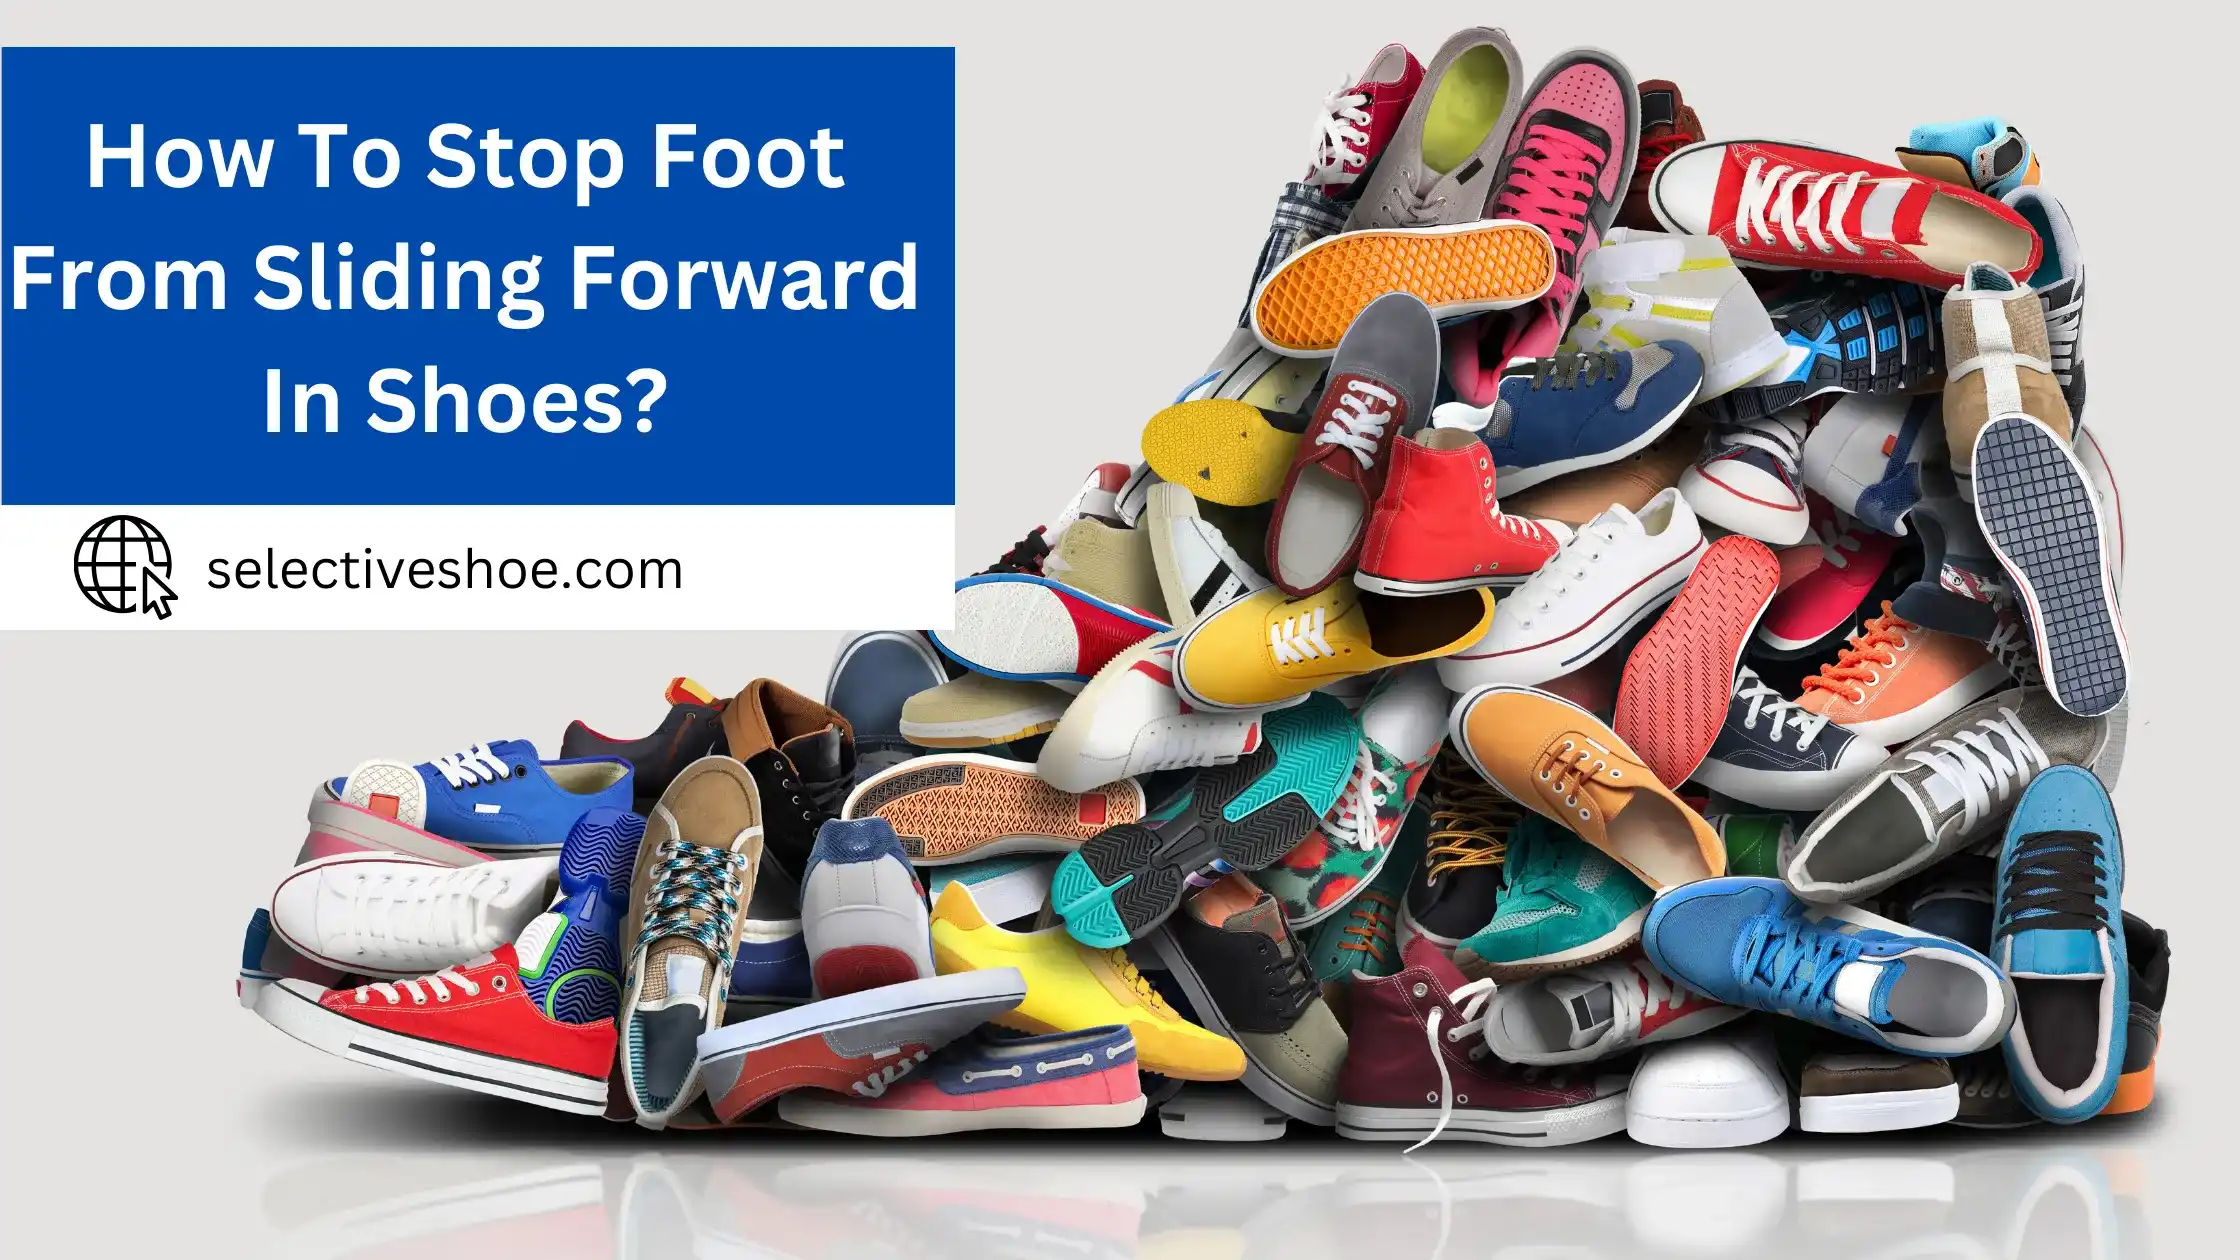 How to Stop Foot From Sliding Forward in Shoes?